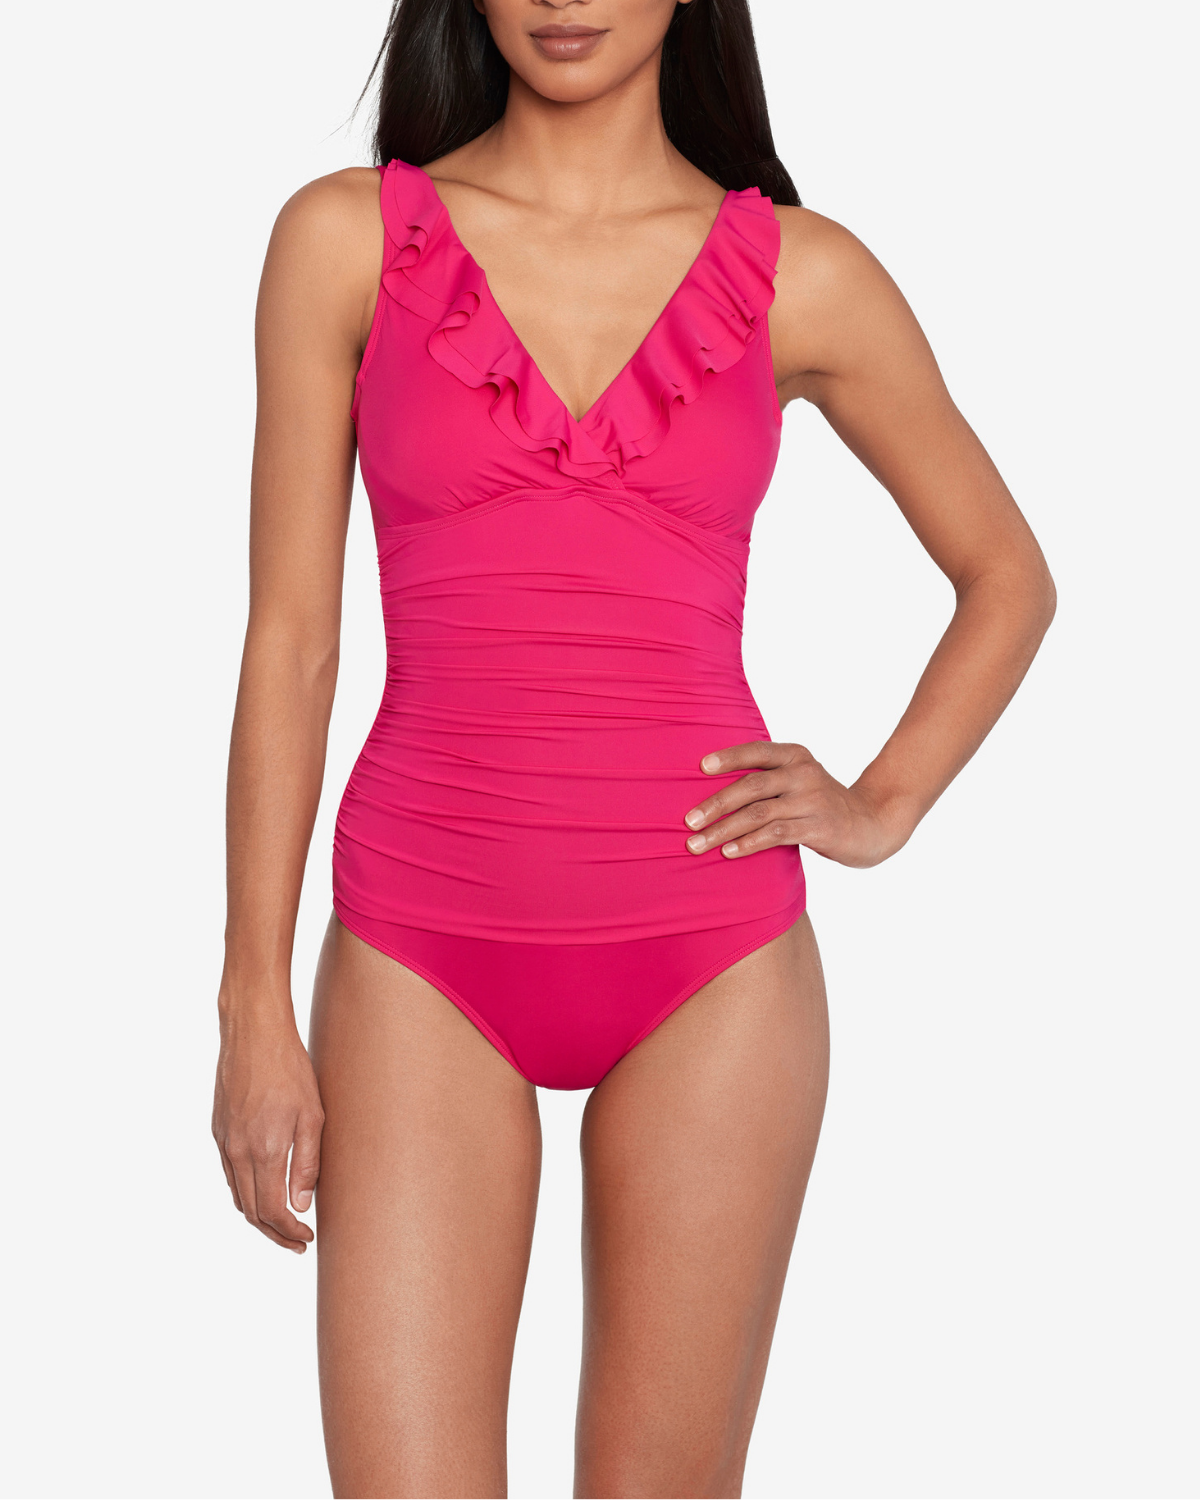 Model wearing a v-neck one piece with a ruffle trim and shirred panel around the torso in pink